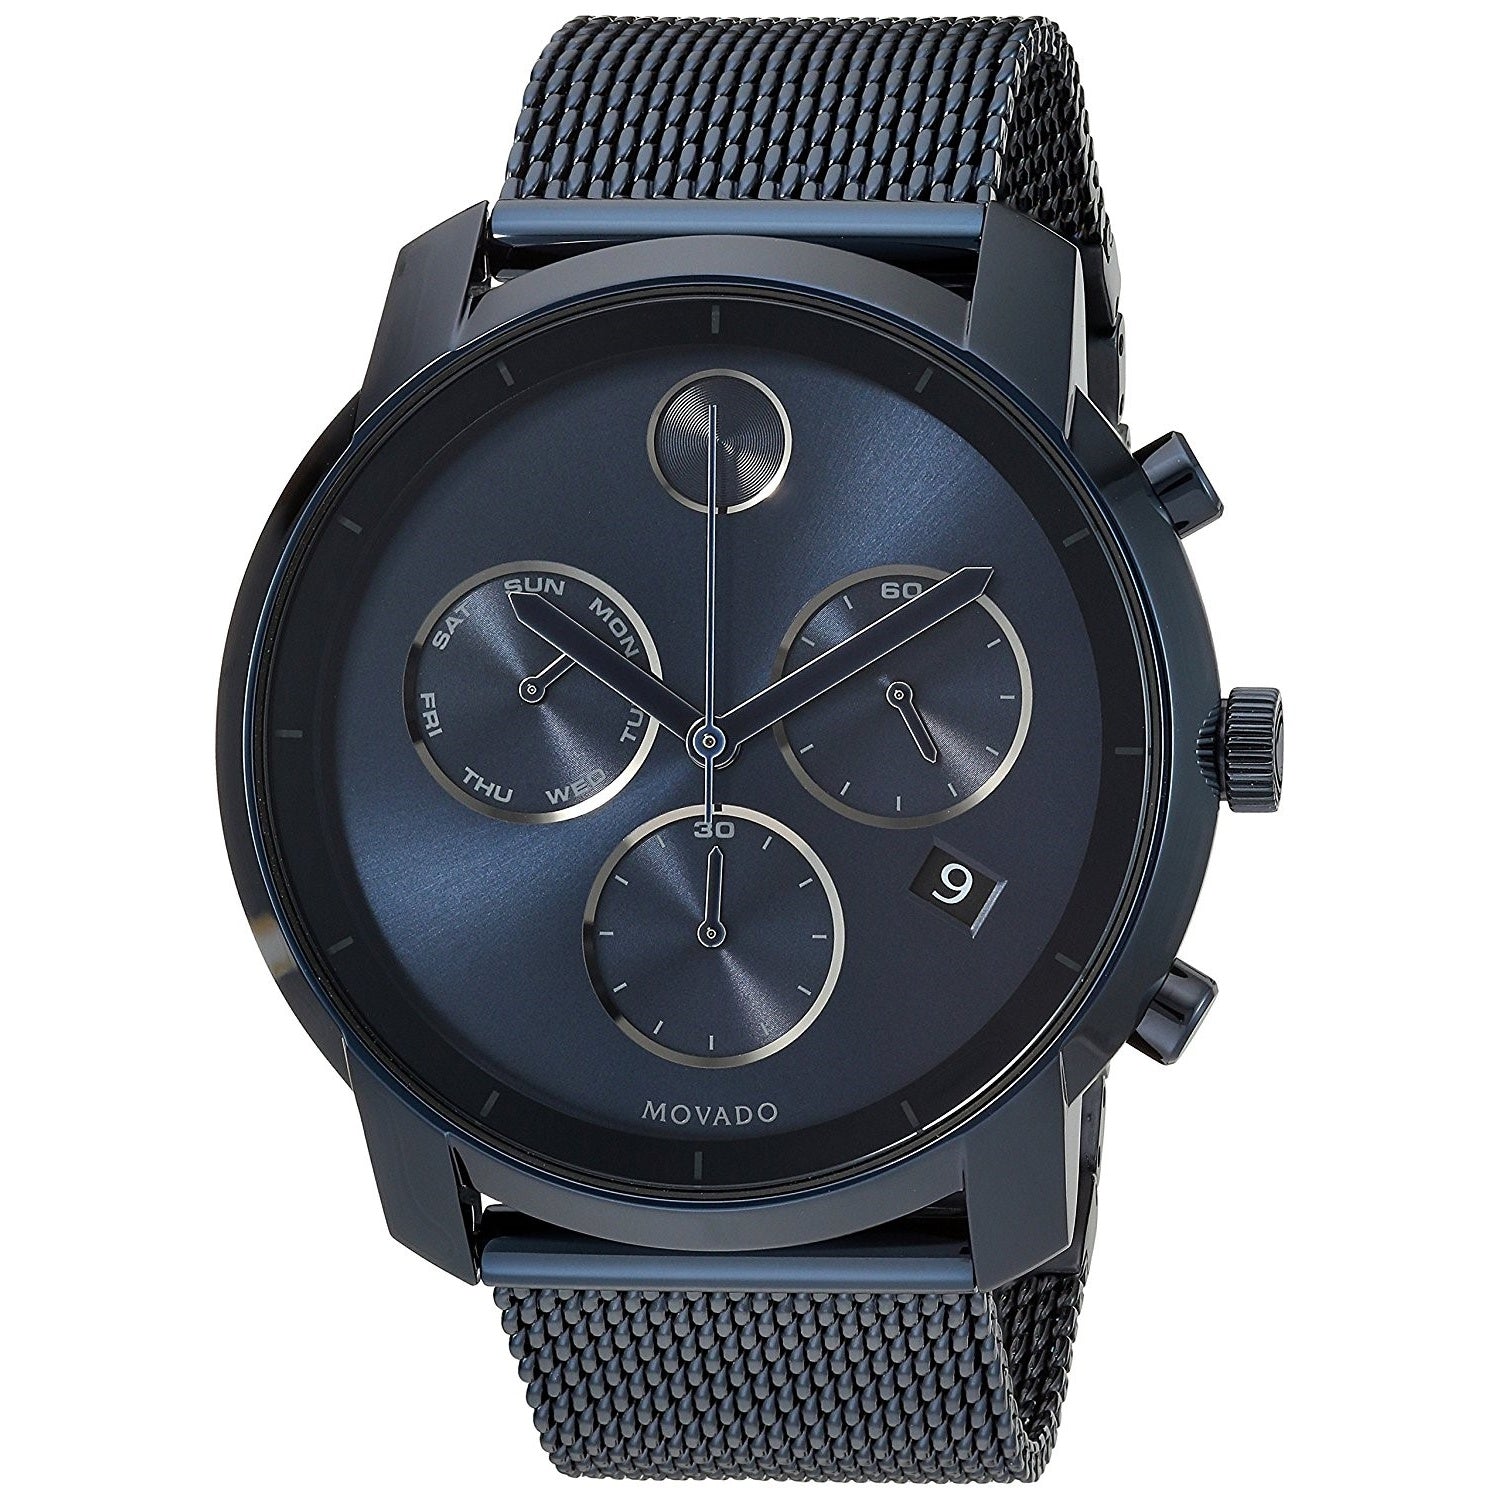 Movado Men's 3600403 'Bold' Chronograph Blue Stainless Steel Watch | eBay